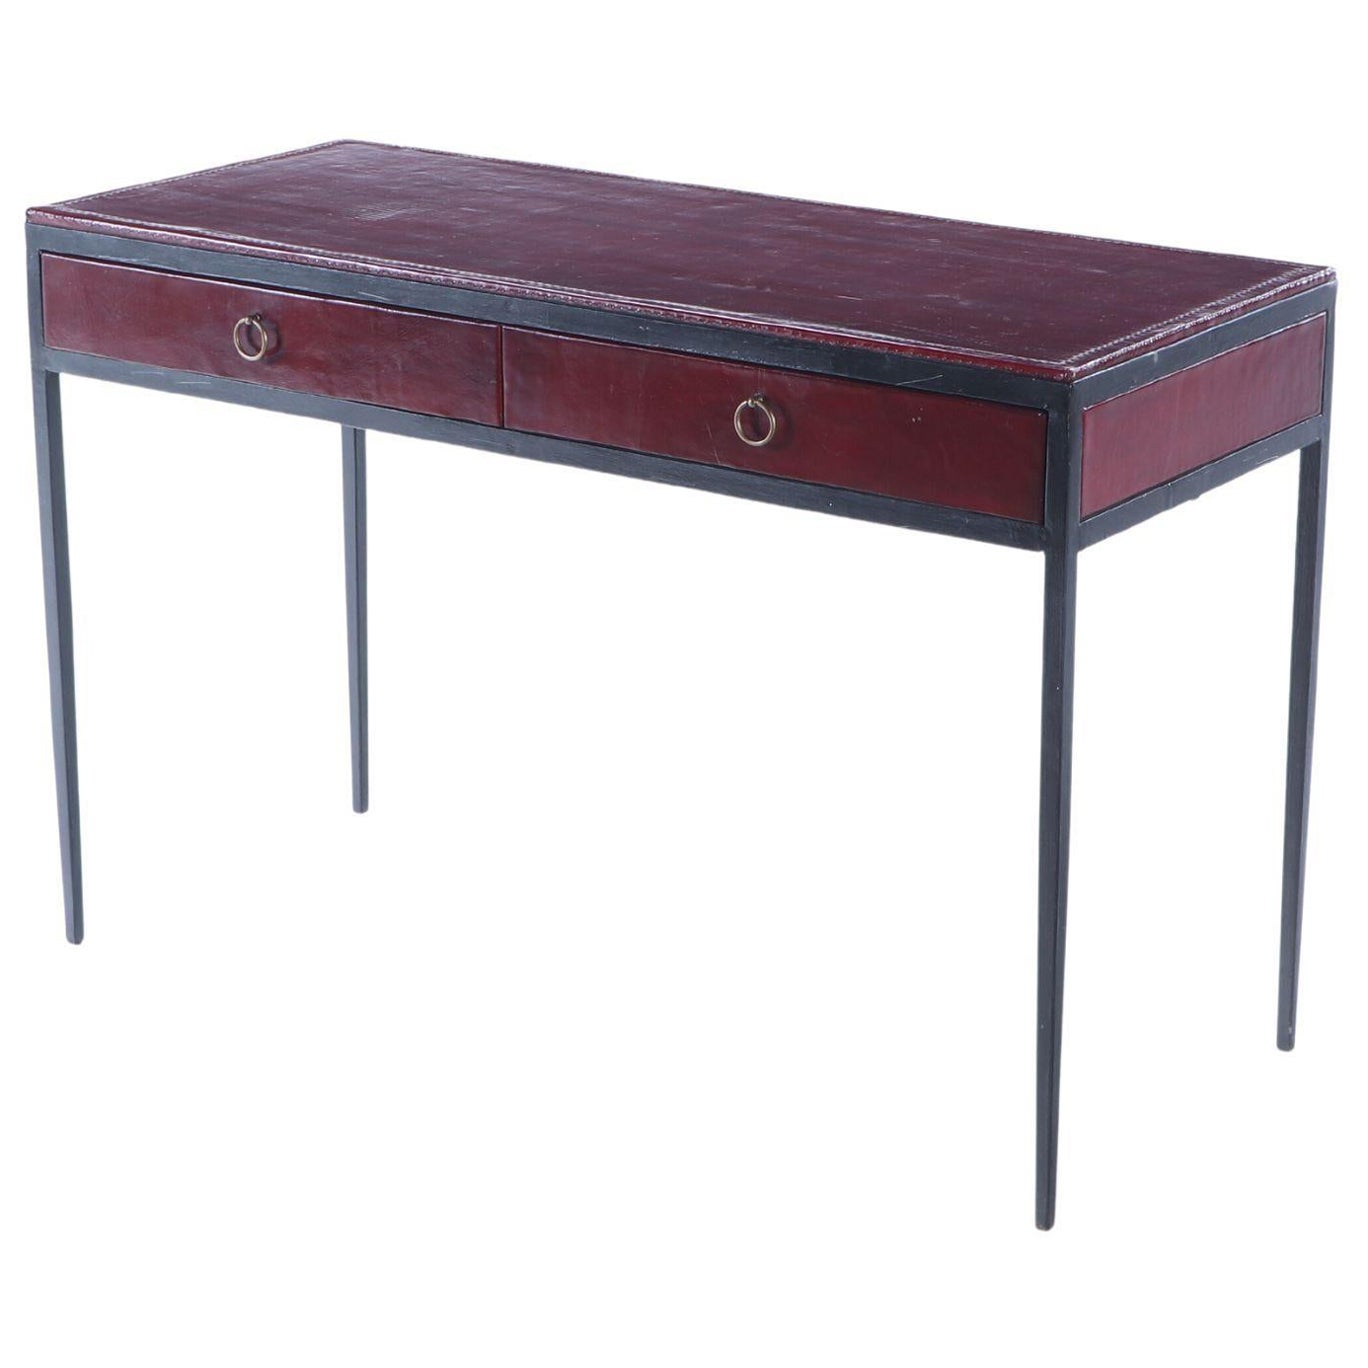 Iron and red leather writing desk with two drawers, manner of Jean-Micheal Frank For Sale